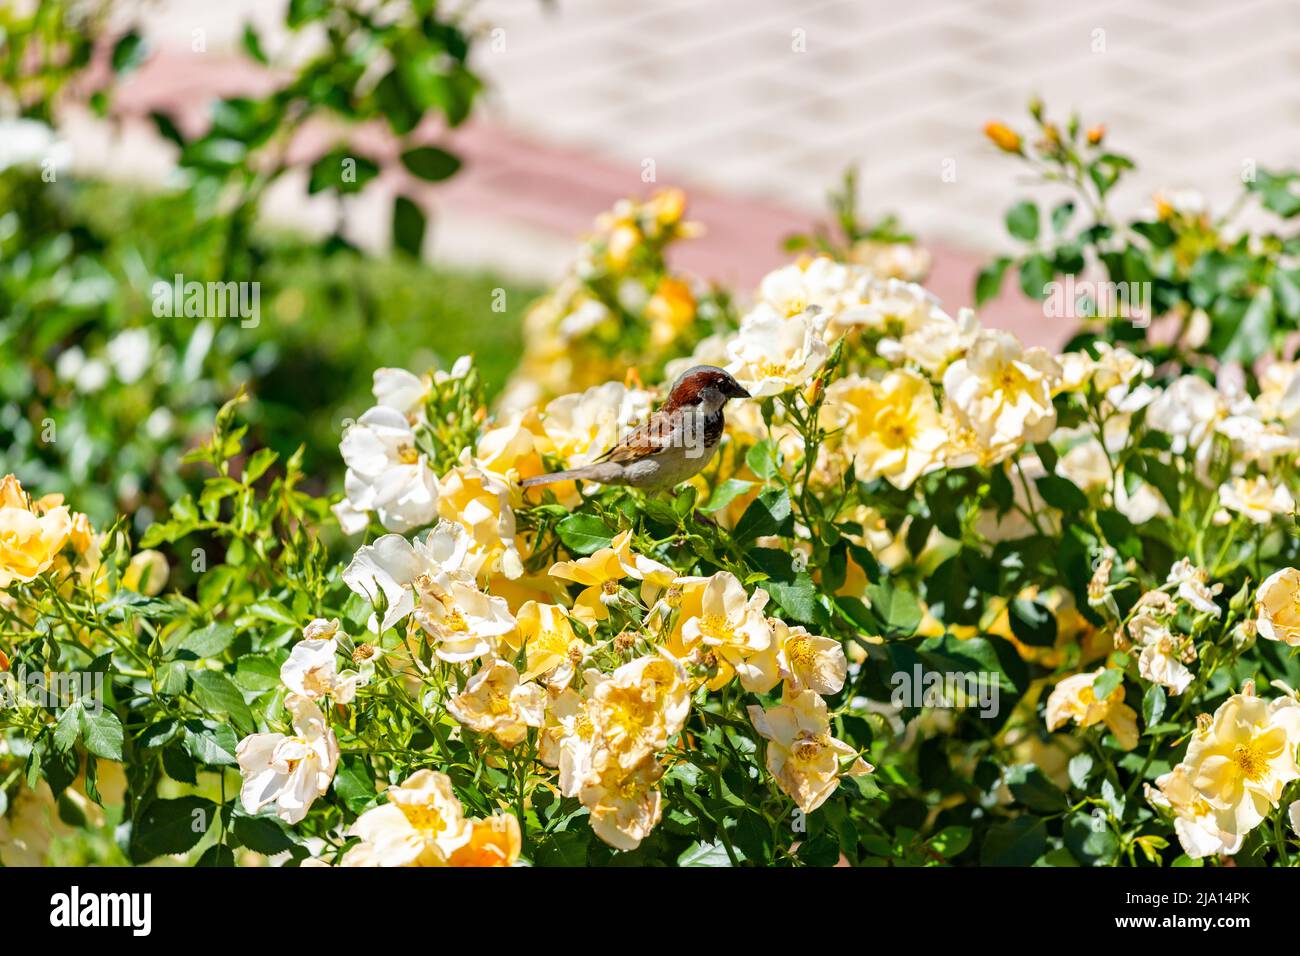 Wild Rose Bird Flower High Resolution Stock Photography and Images - Alamy